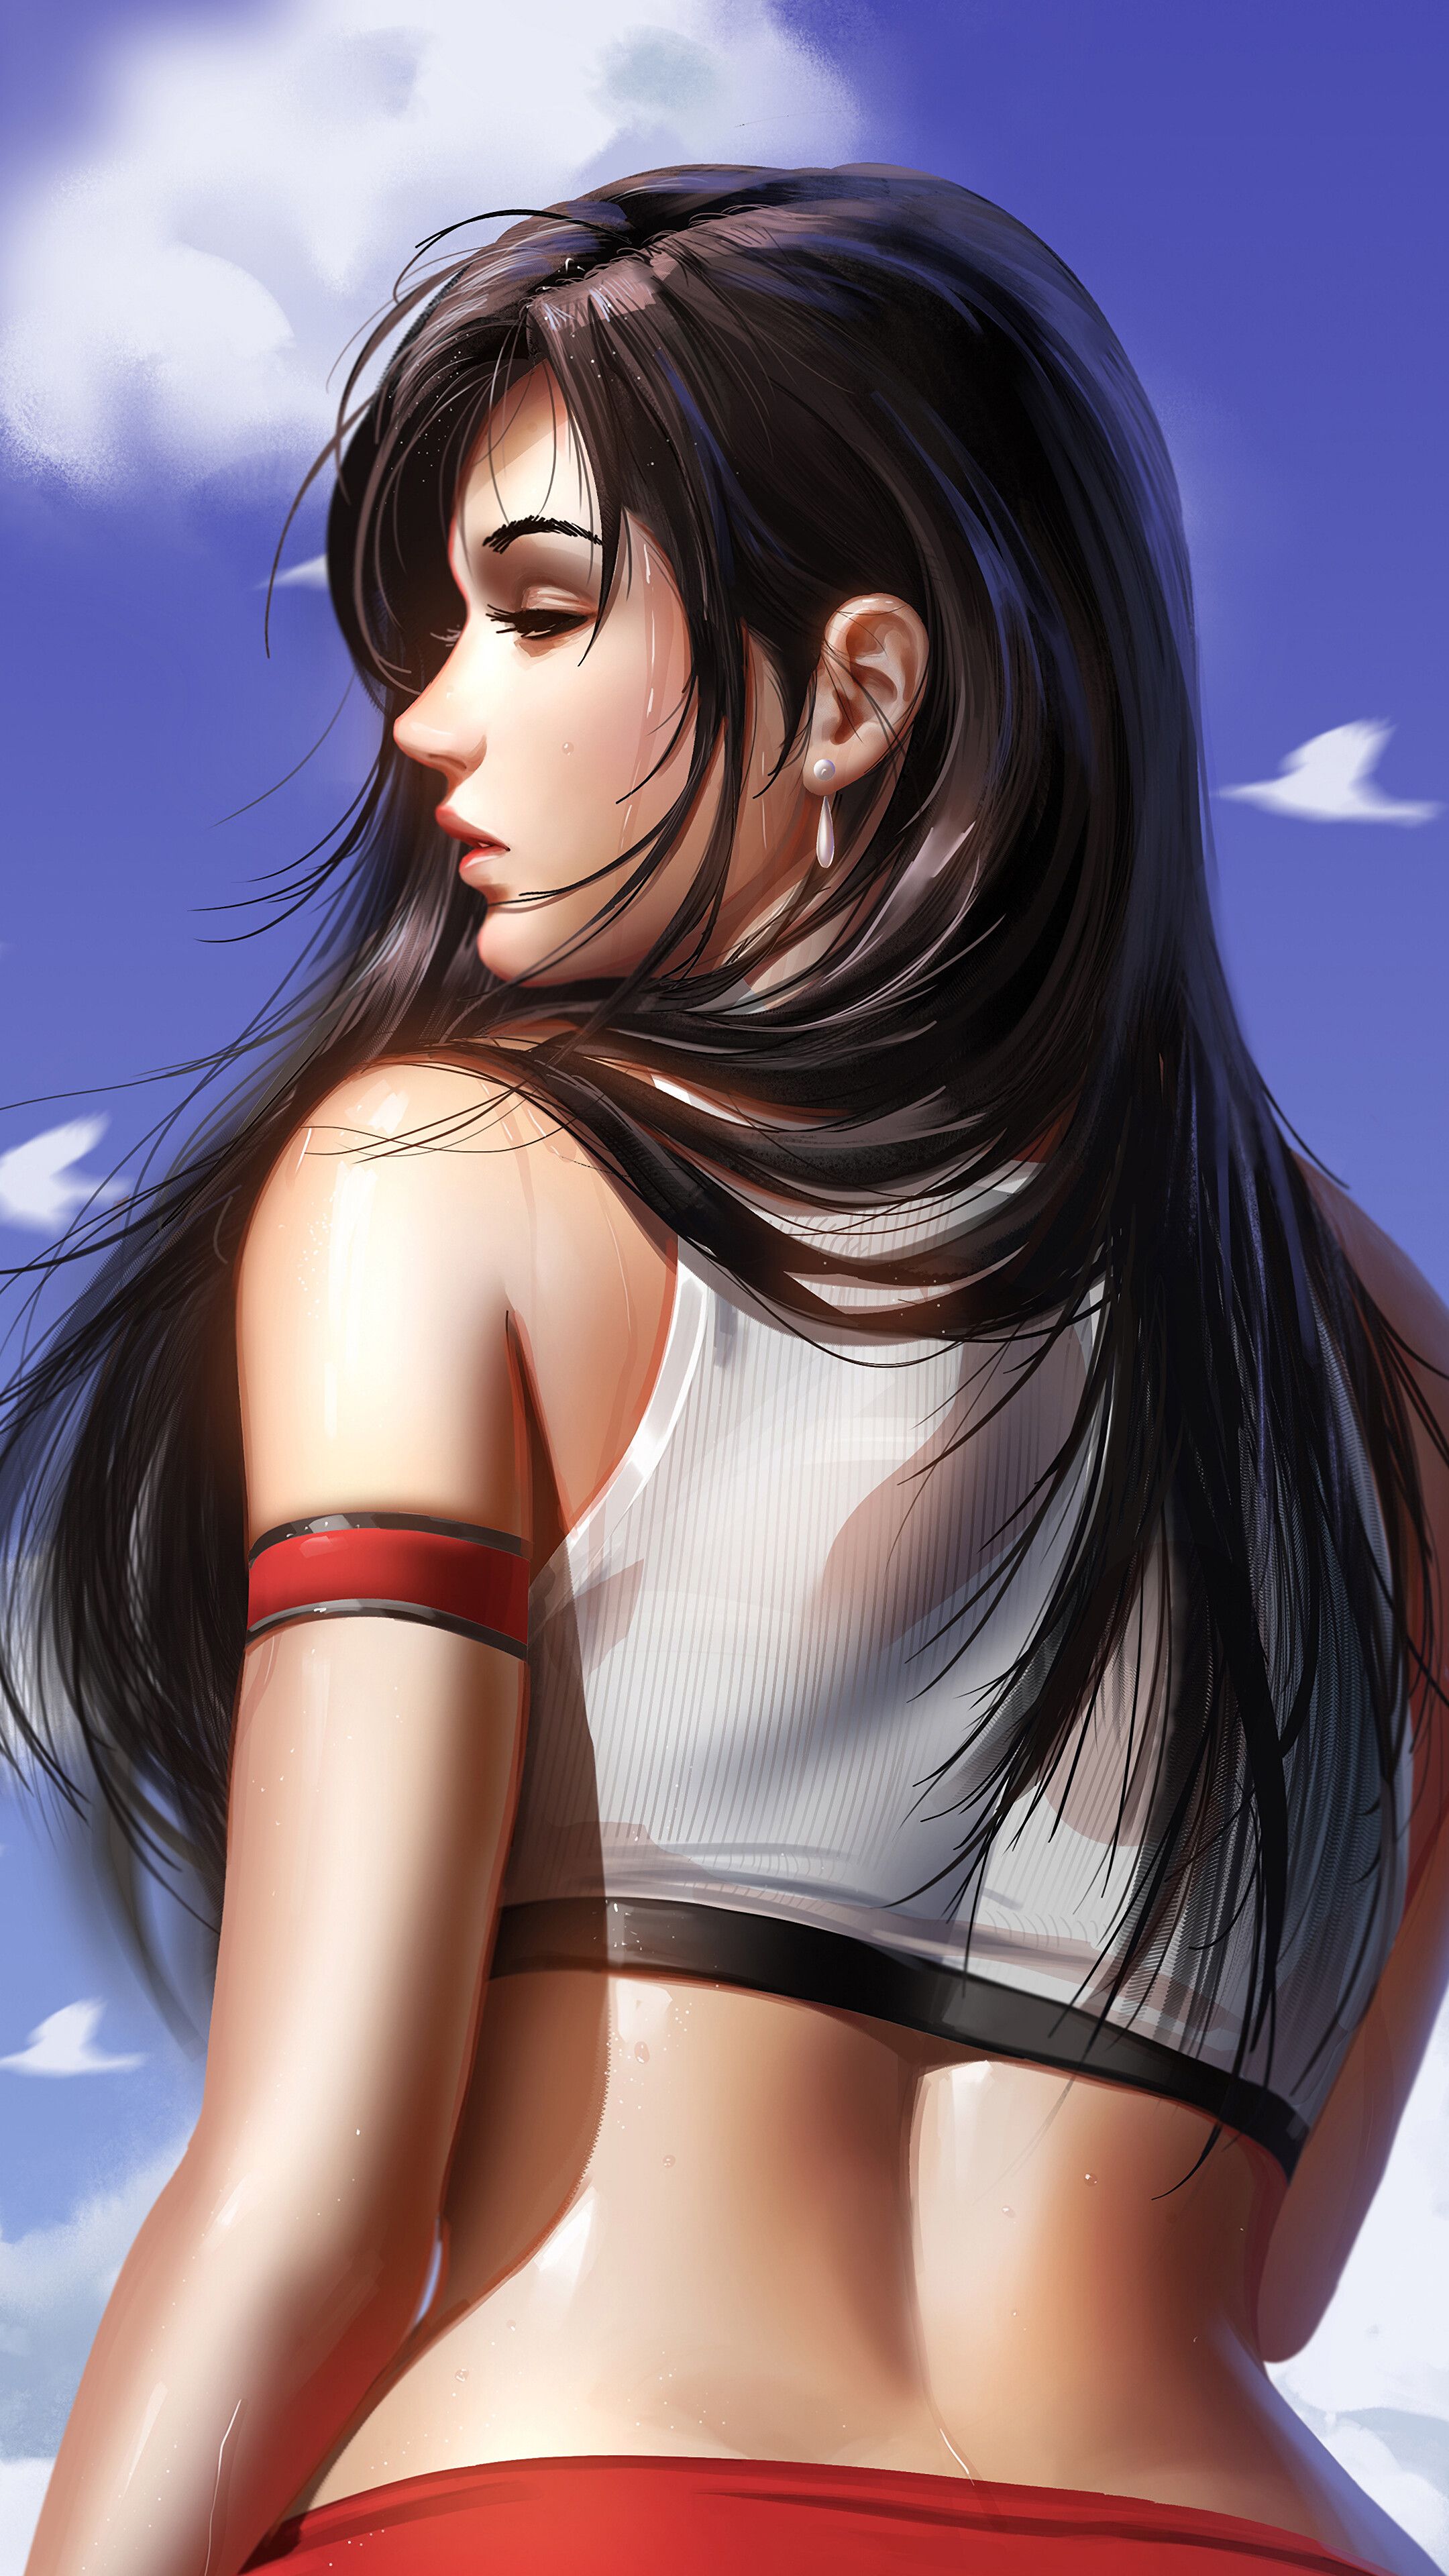 Remake, Tifa Final, Fantasy, Lockhart, 4K iPhone 6s, 6 HD Wallpaper, Image, Background, Photo and Picture. iPhone Wallpaper. Mocah.org HD Wallpaper